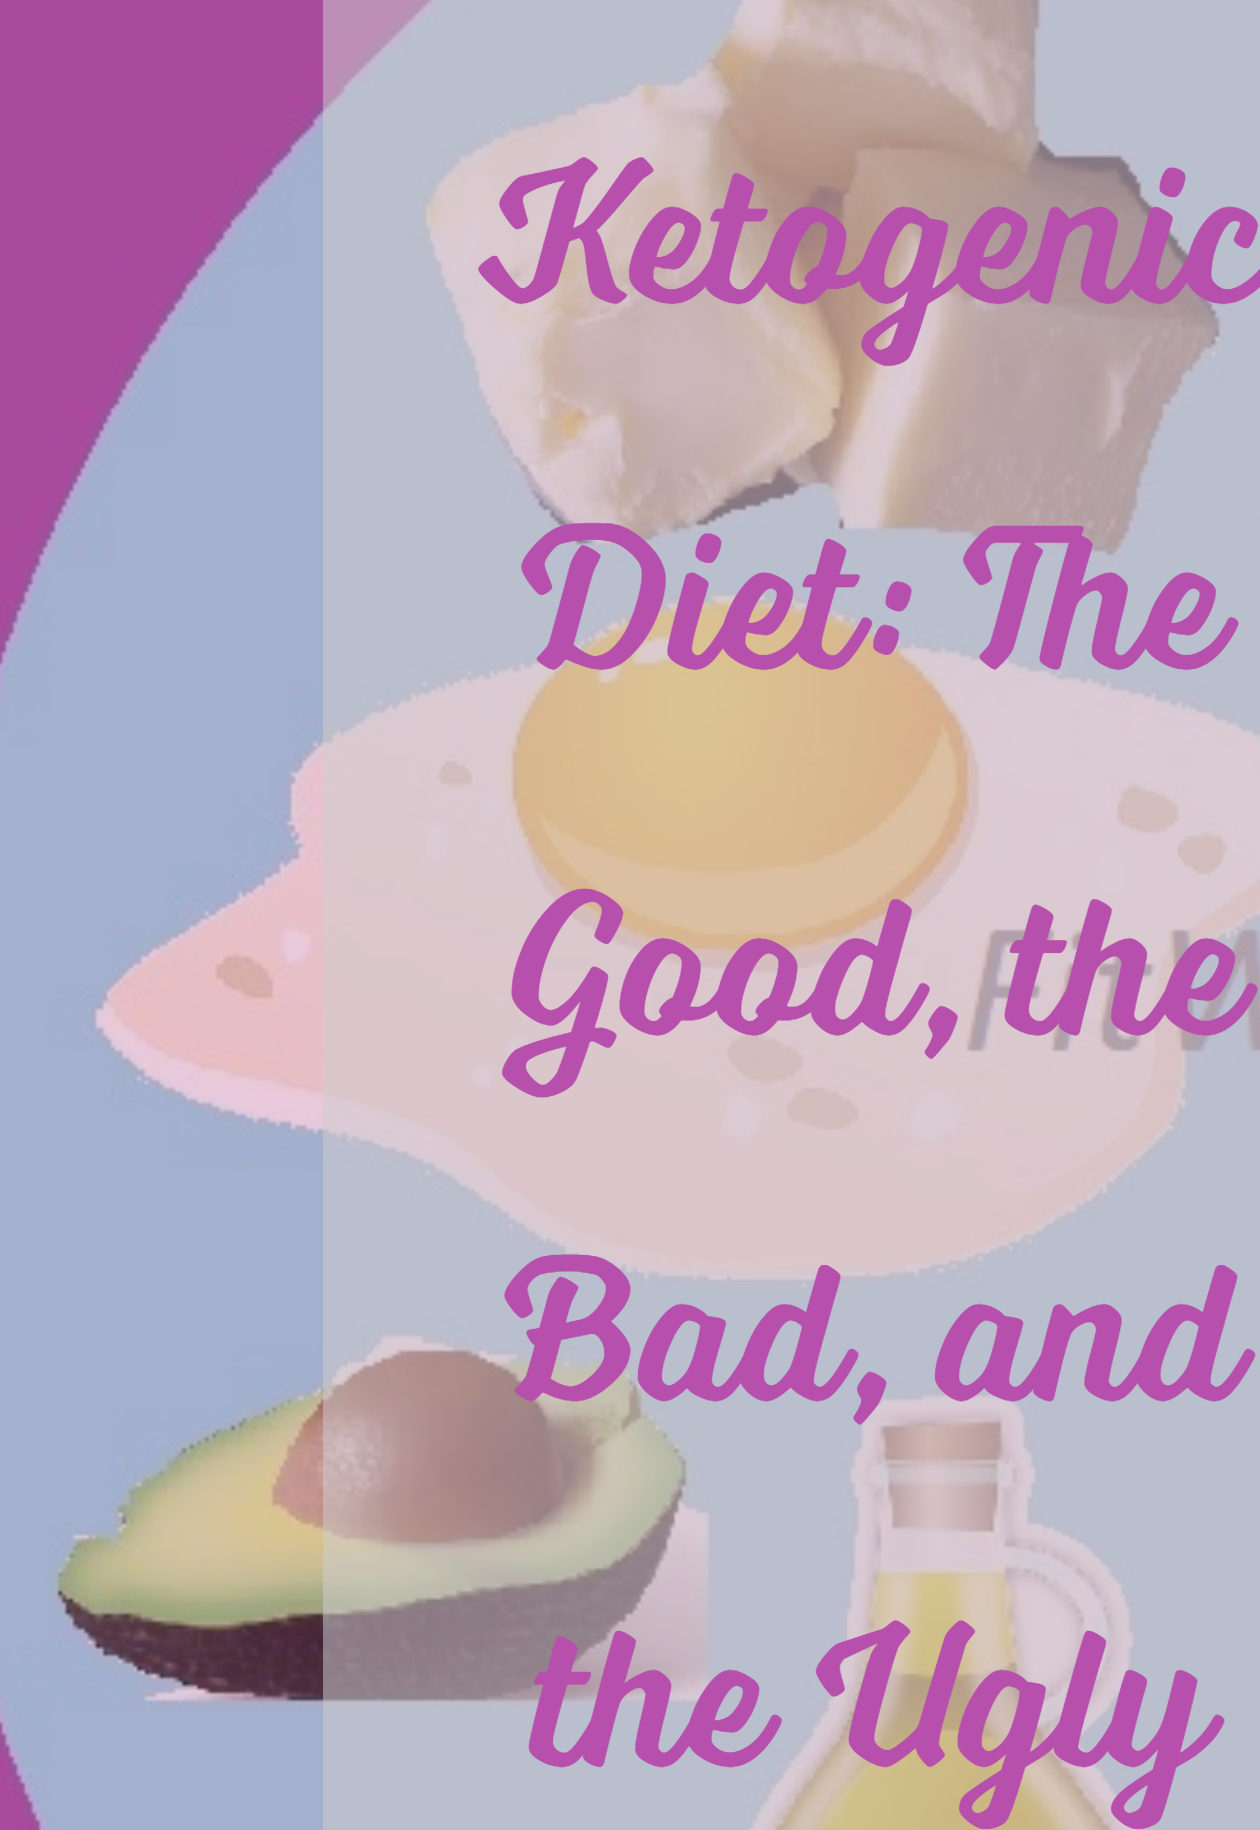 ketogenic-diet-good-bad-ugly-kelly-athetlics-what-should-i-know-before-going-keto